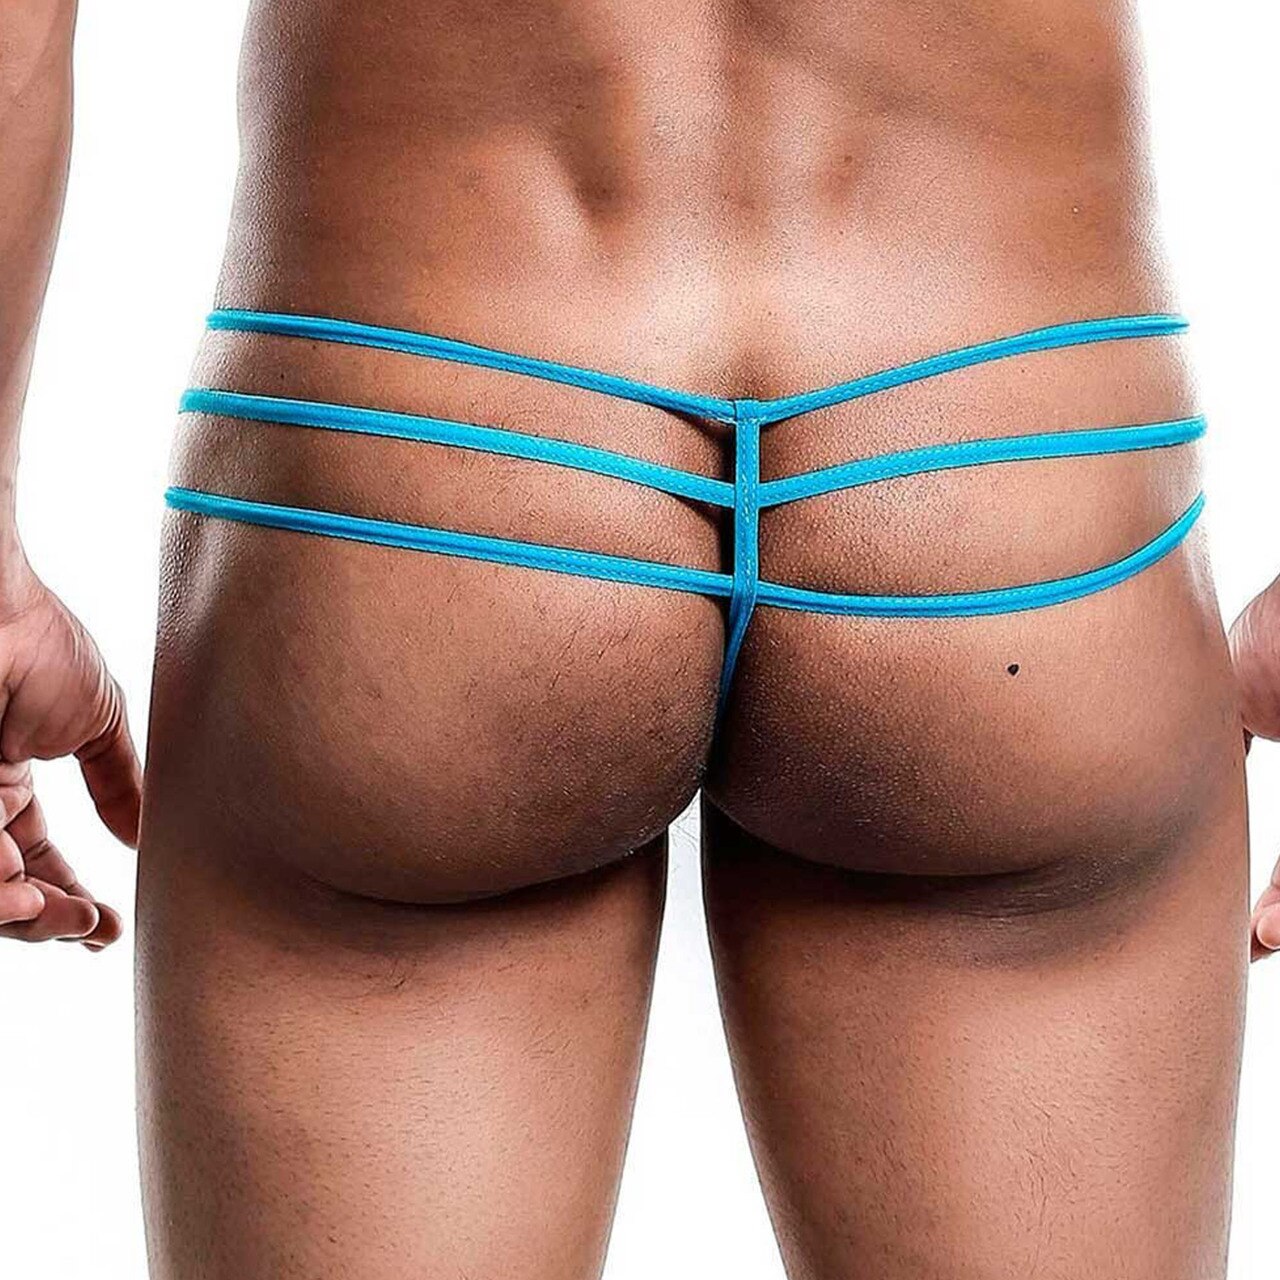 Mens Male Basics Lace G string Thong with Triple Straps Turquoise